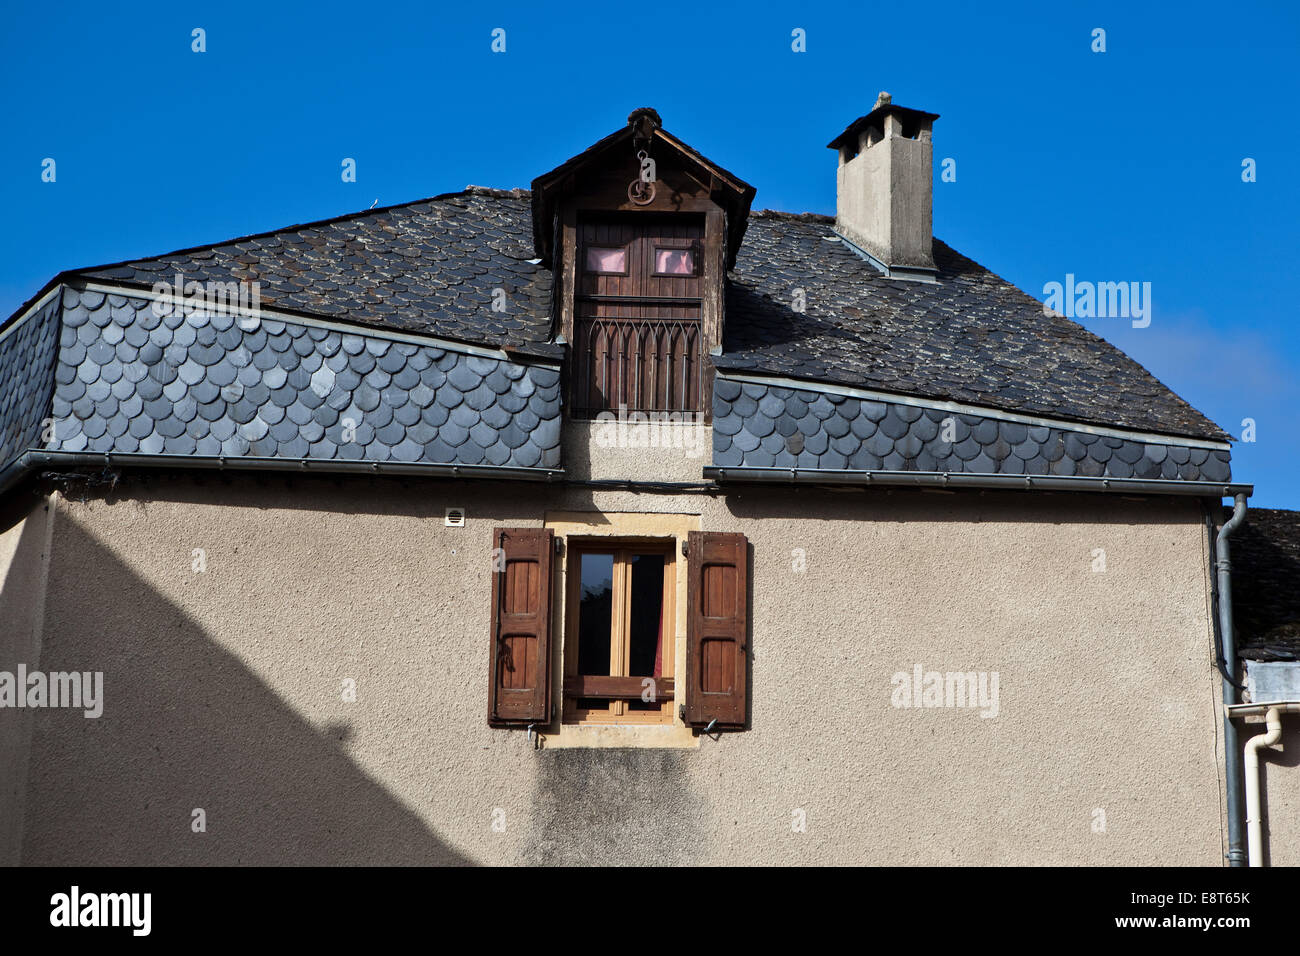 Dormer on a sloping roof Stock Photo